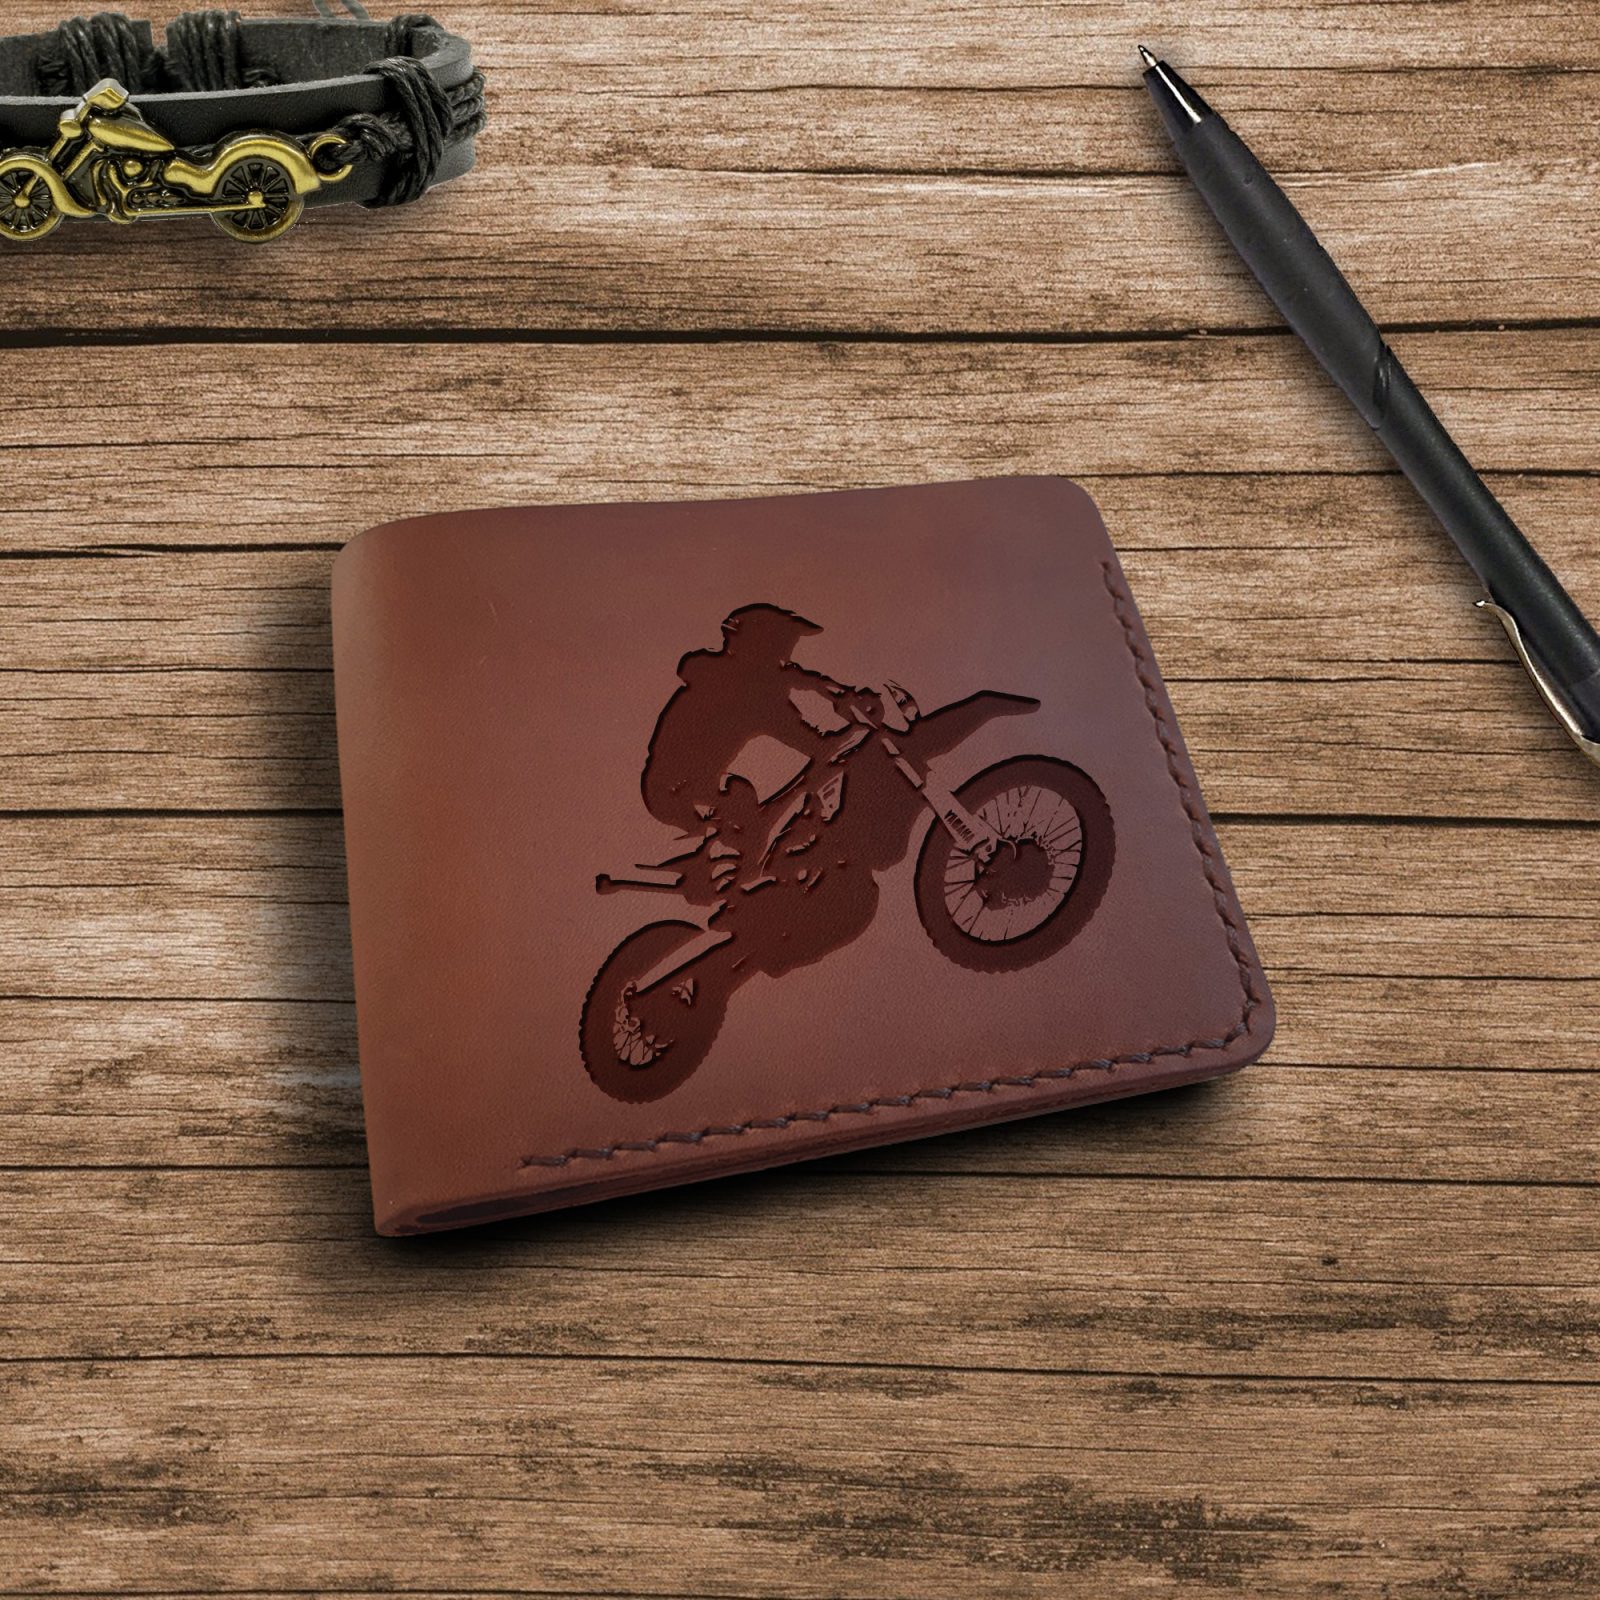 handmade leather browm wallet with racing motocycle